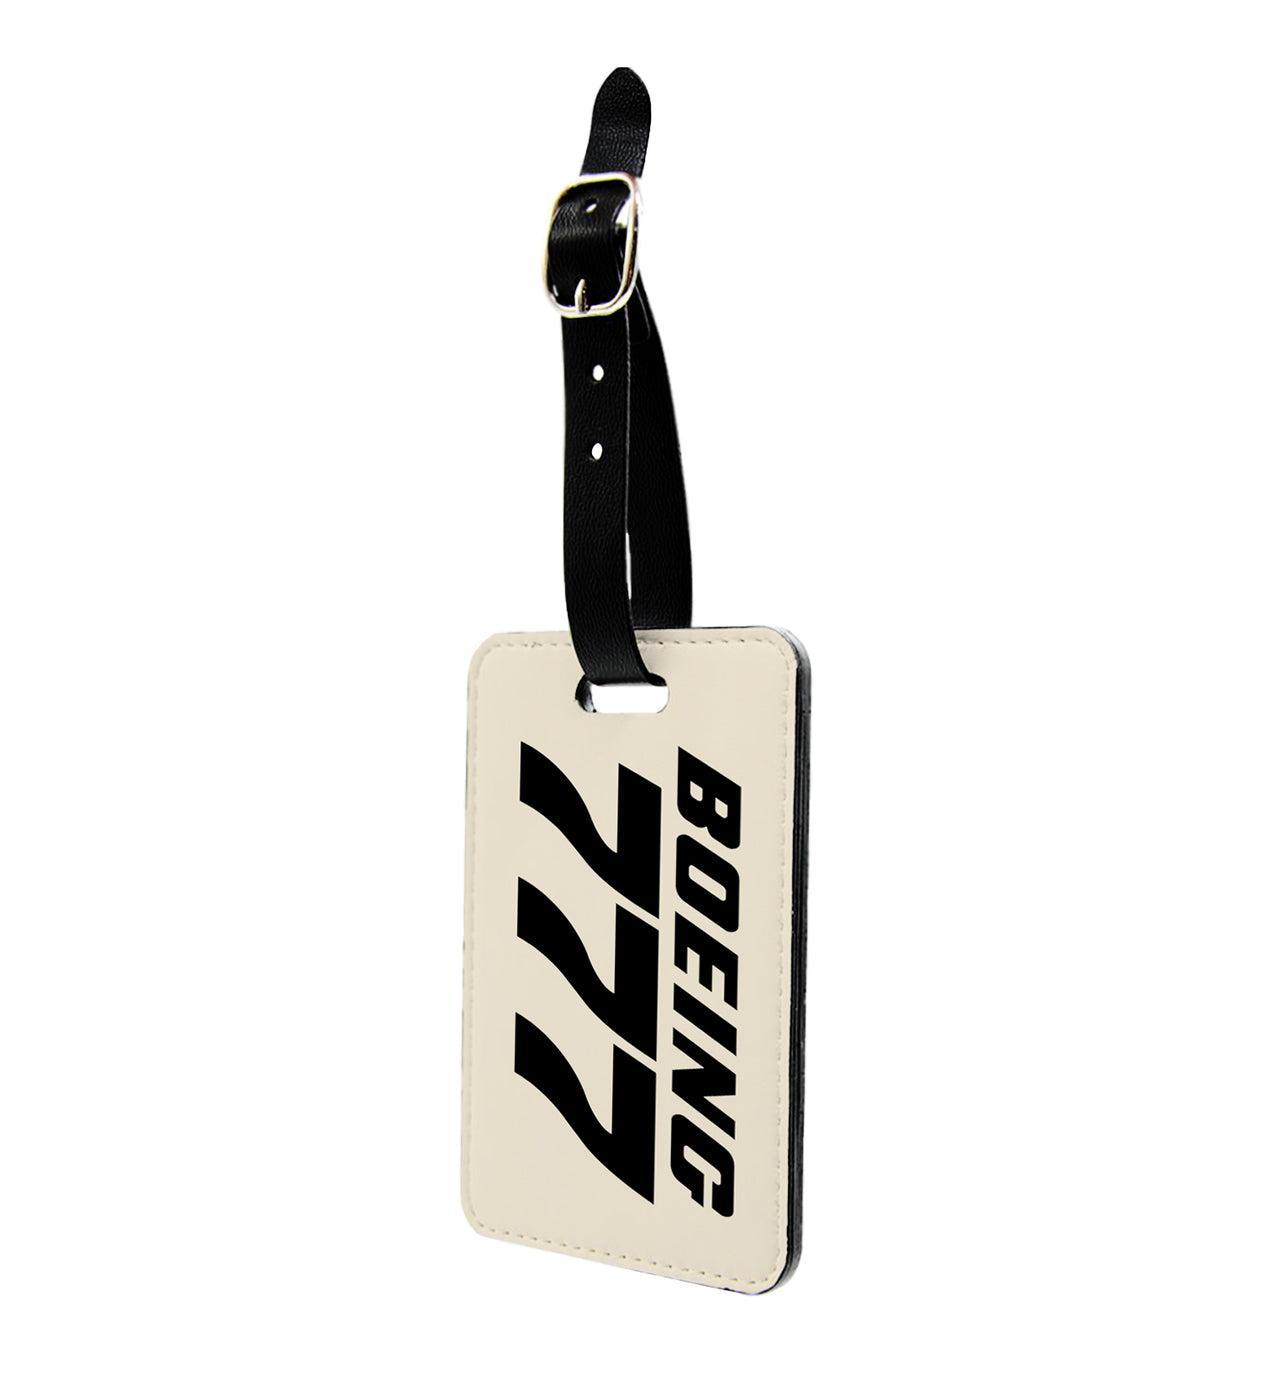 Boeing 777 & Text Designed Luggage Tag